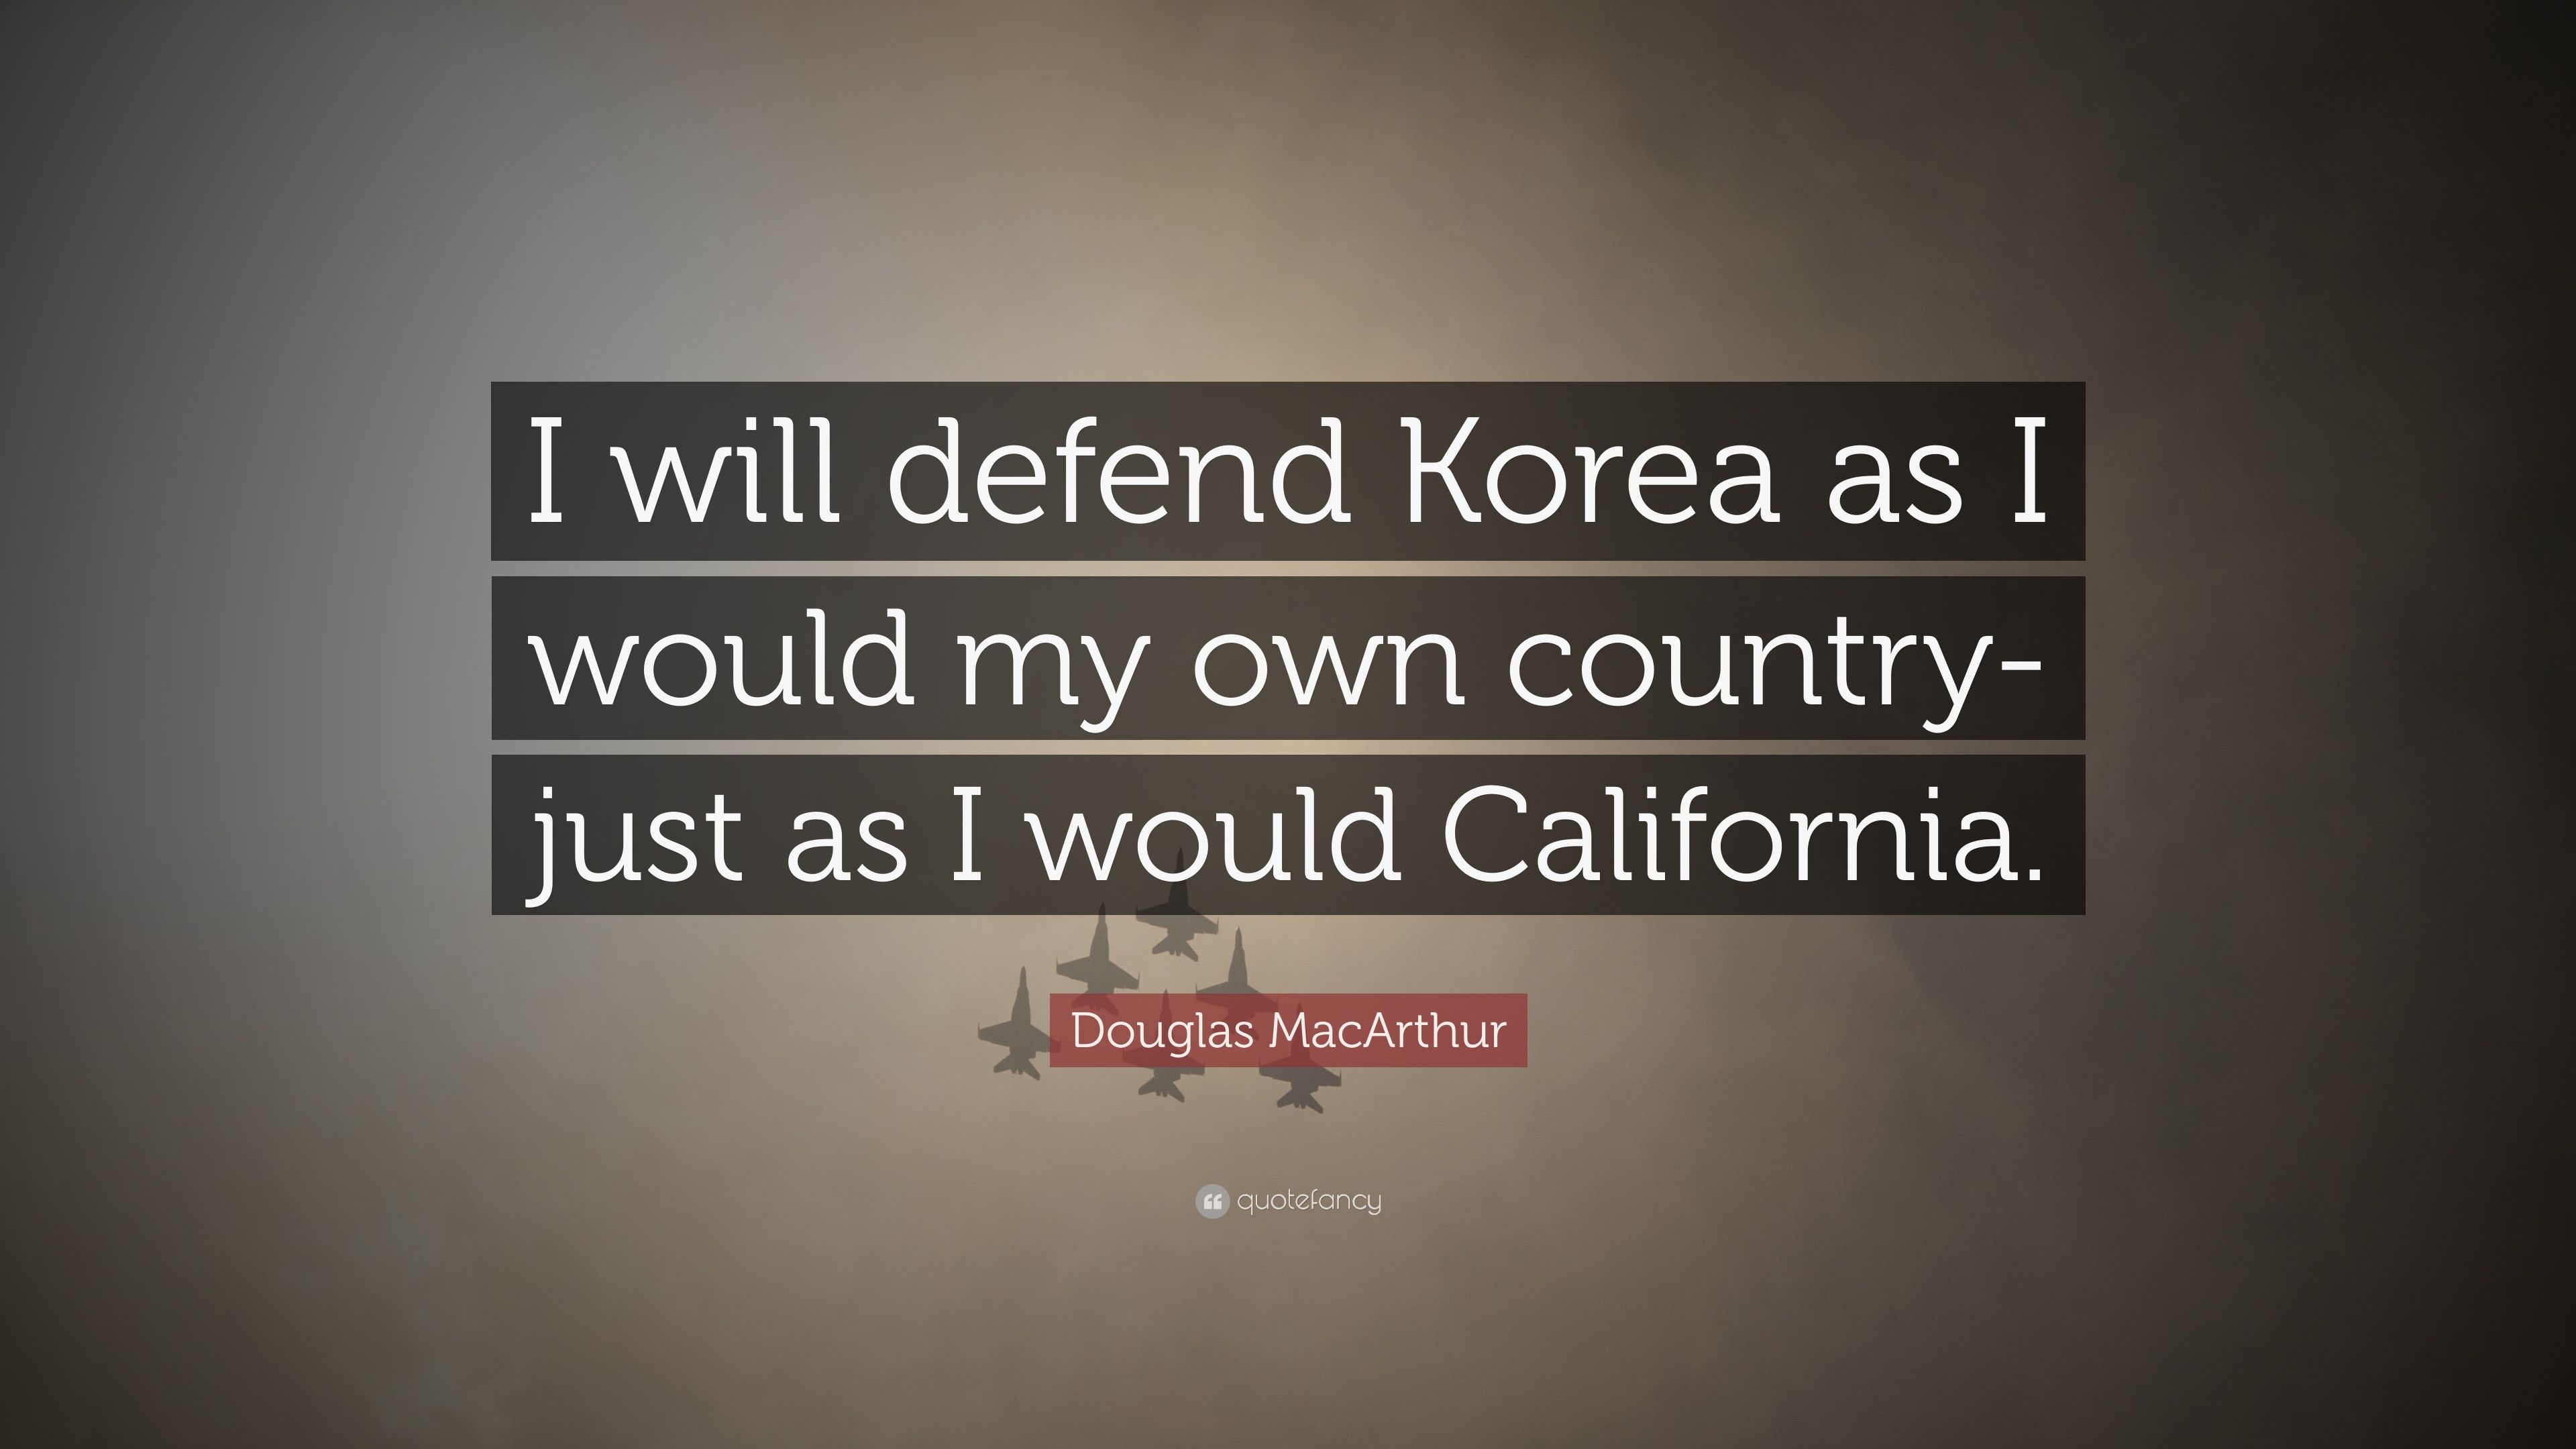 Douglas MacArthur Quote: “I Will Defend Korea As I Would My Own Country Just As I Would California.” (7 Wallpaper)